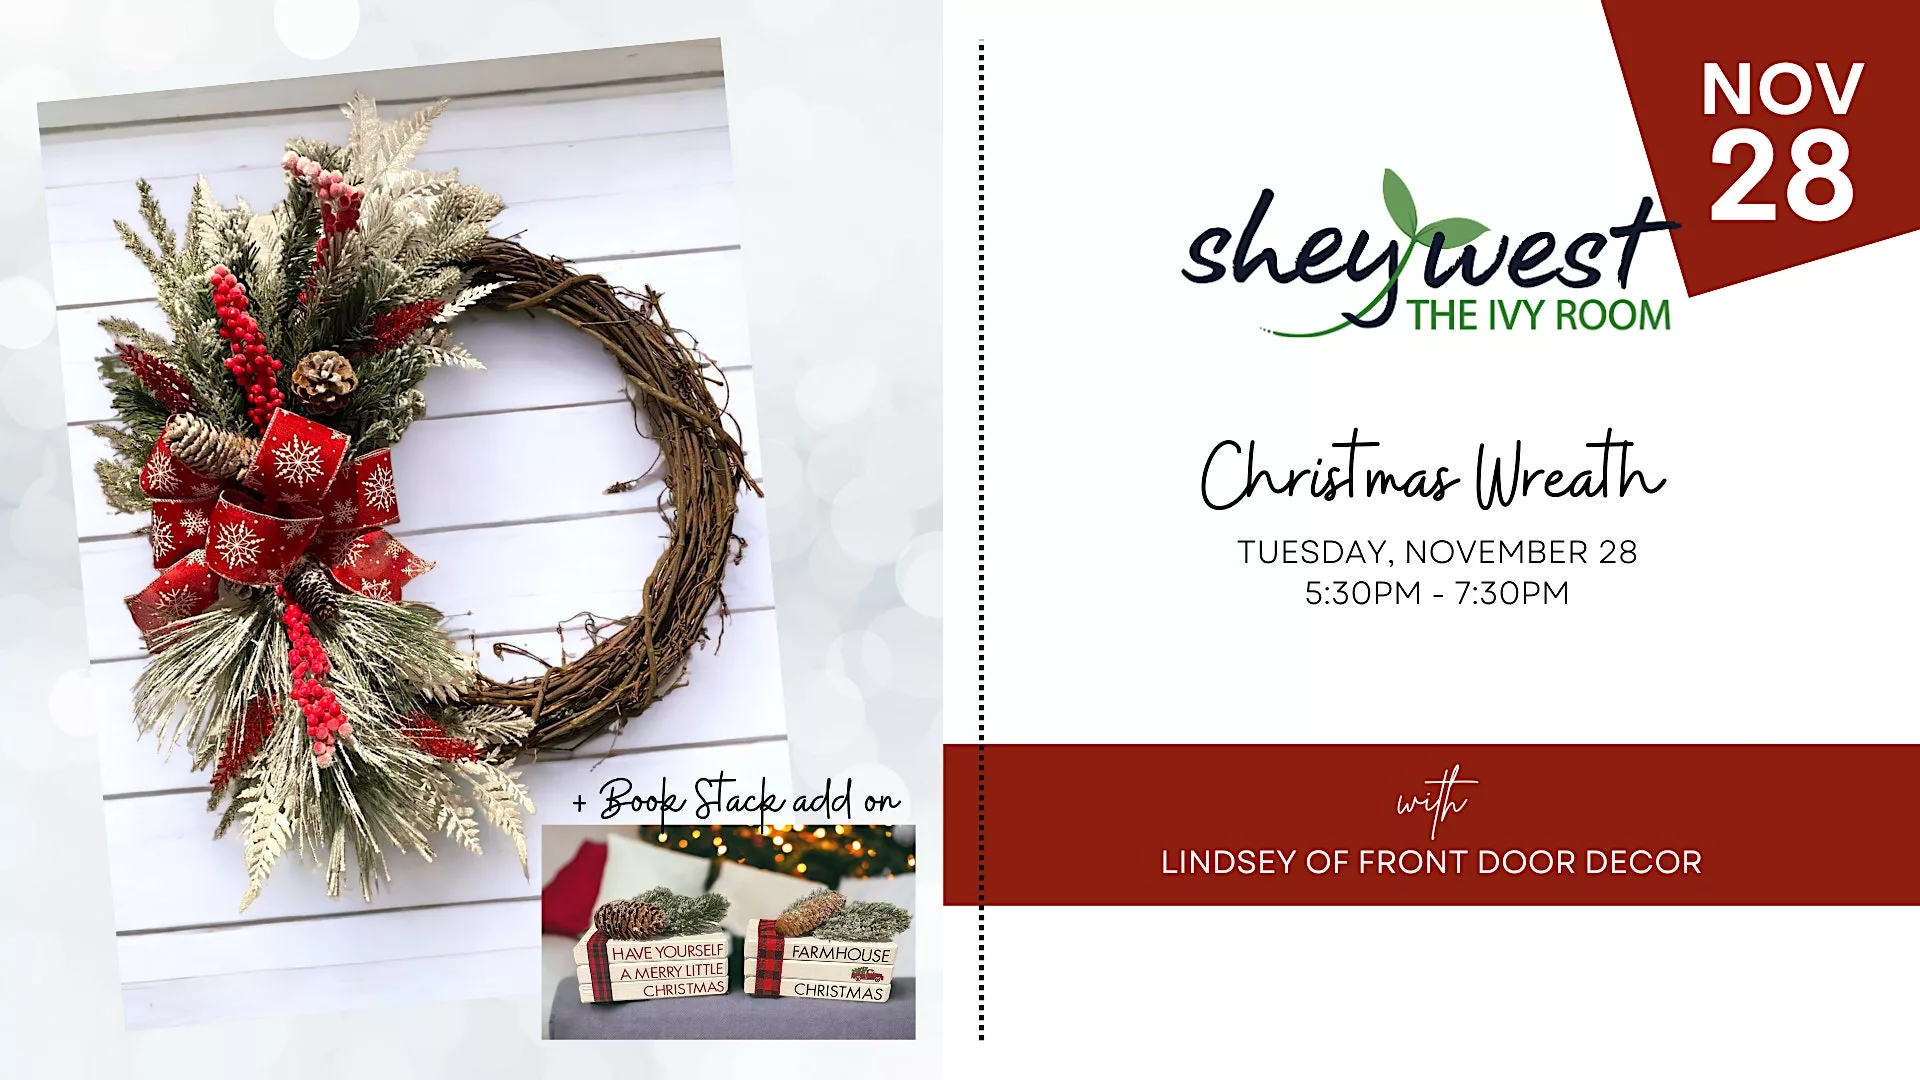 Christmas Wreath Workshop (with book stack add on!)